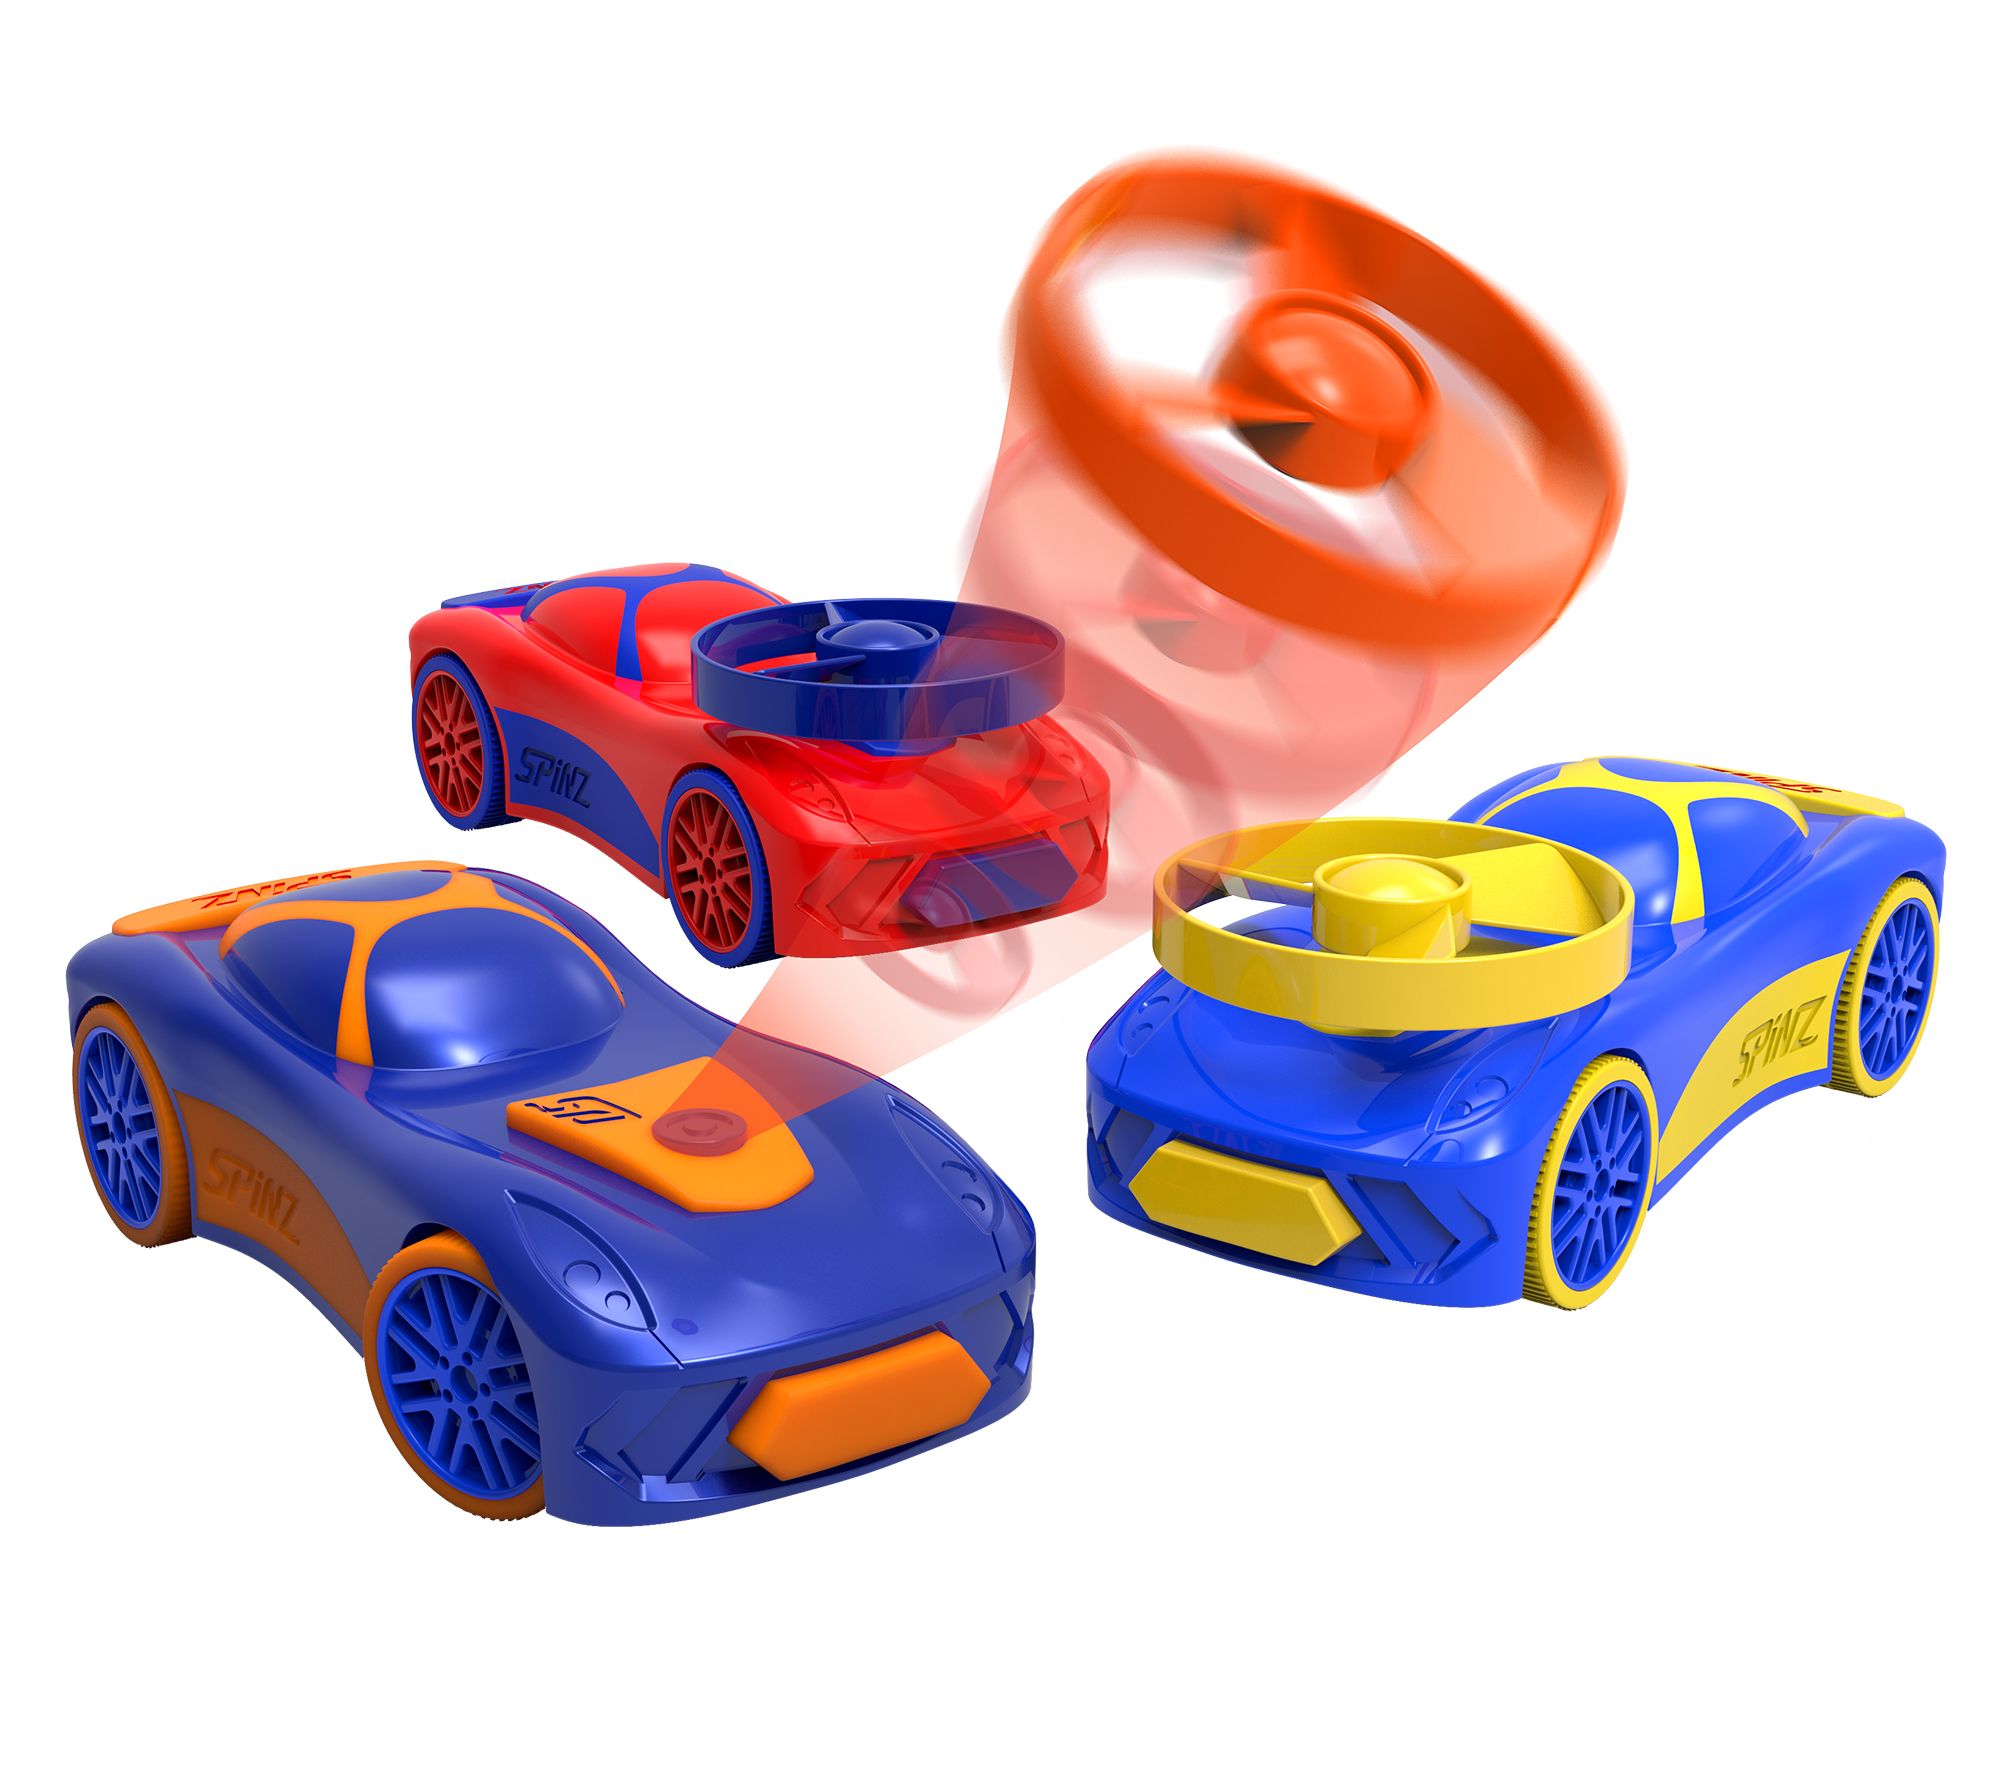 LOT OF 6 MINI PULL BACK CARS 2.25" PARTY FAVOR TOY TREAT BOXES GOODY BAGS 